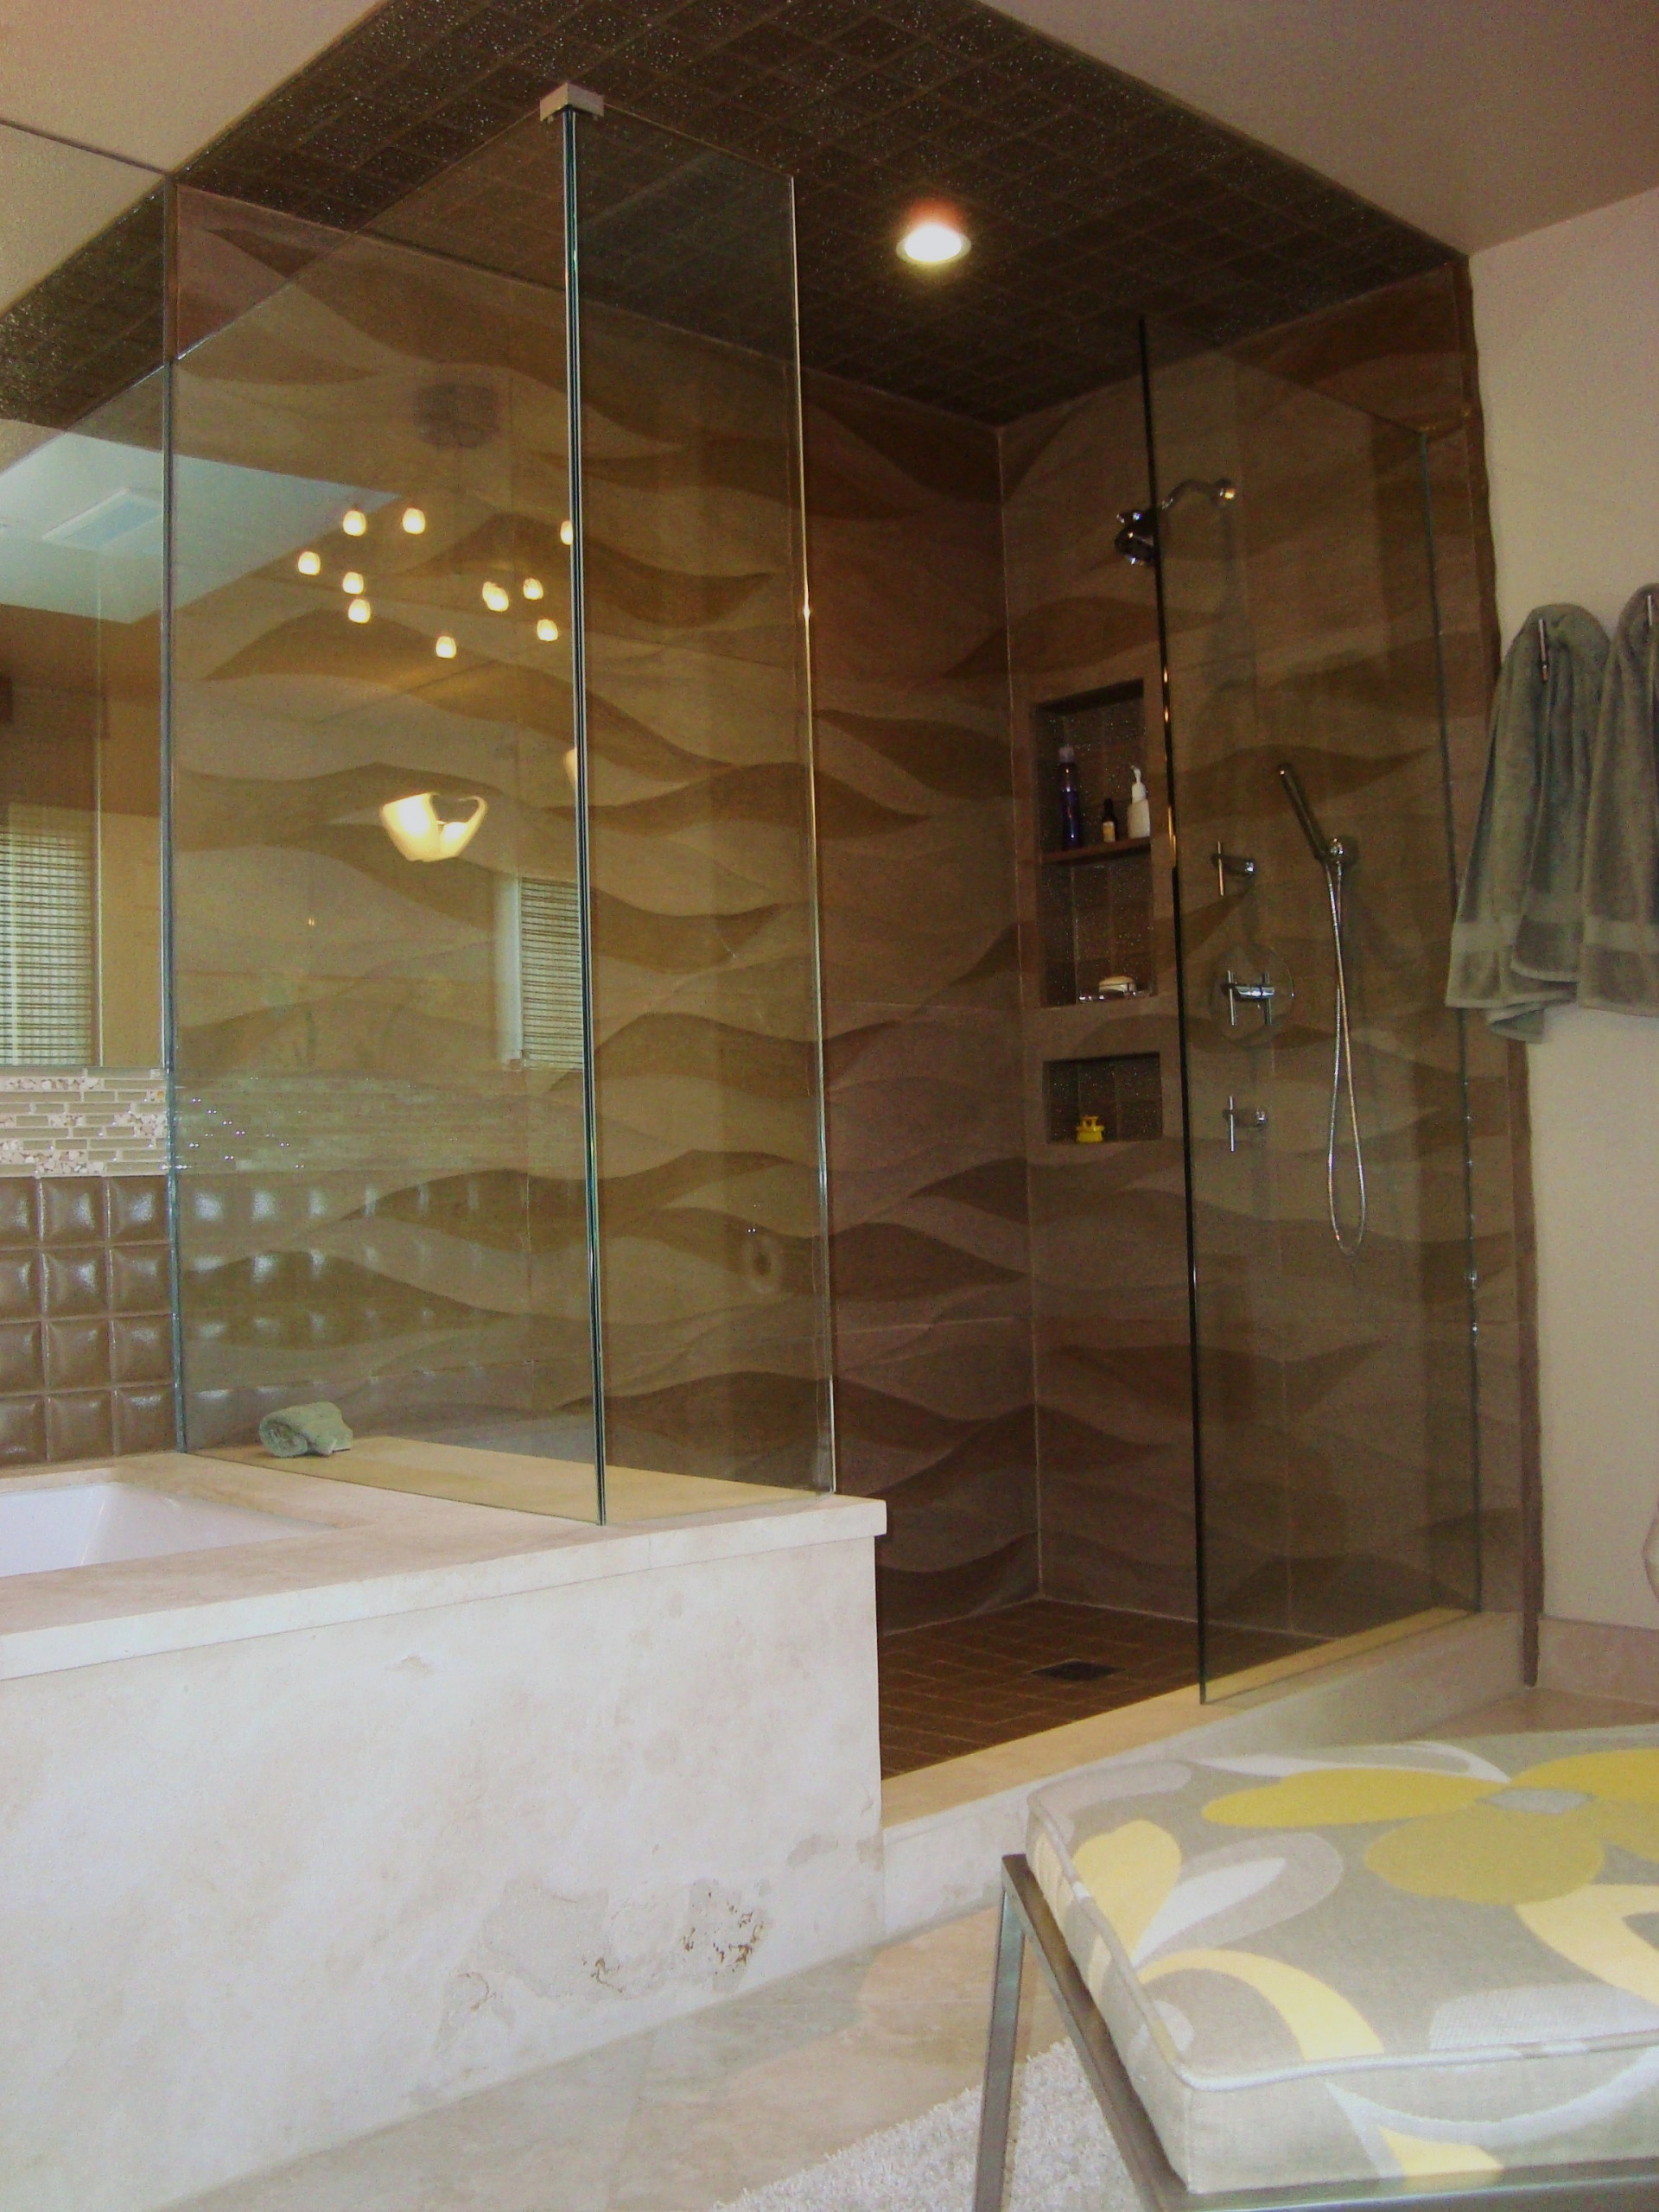 Lofrano Master Bath and Shower with a wave like textured tile